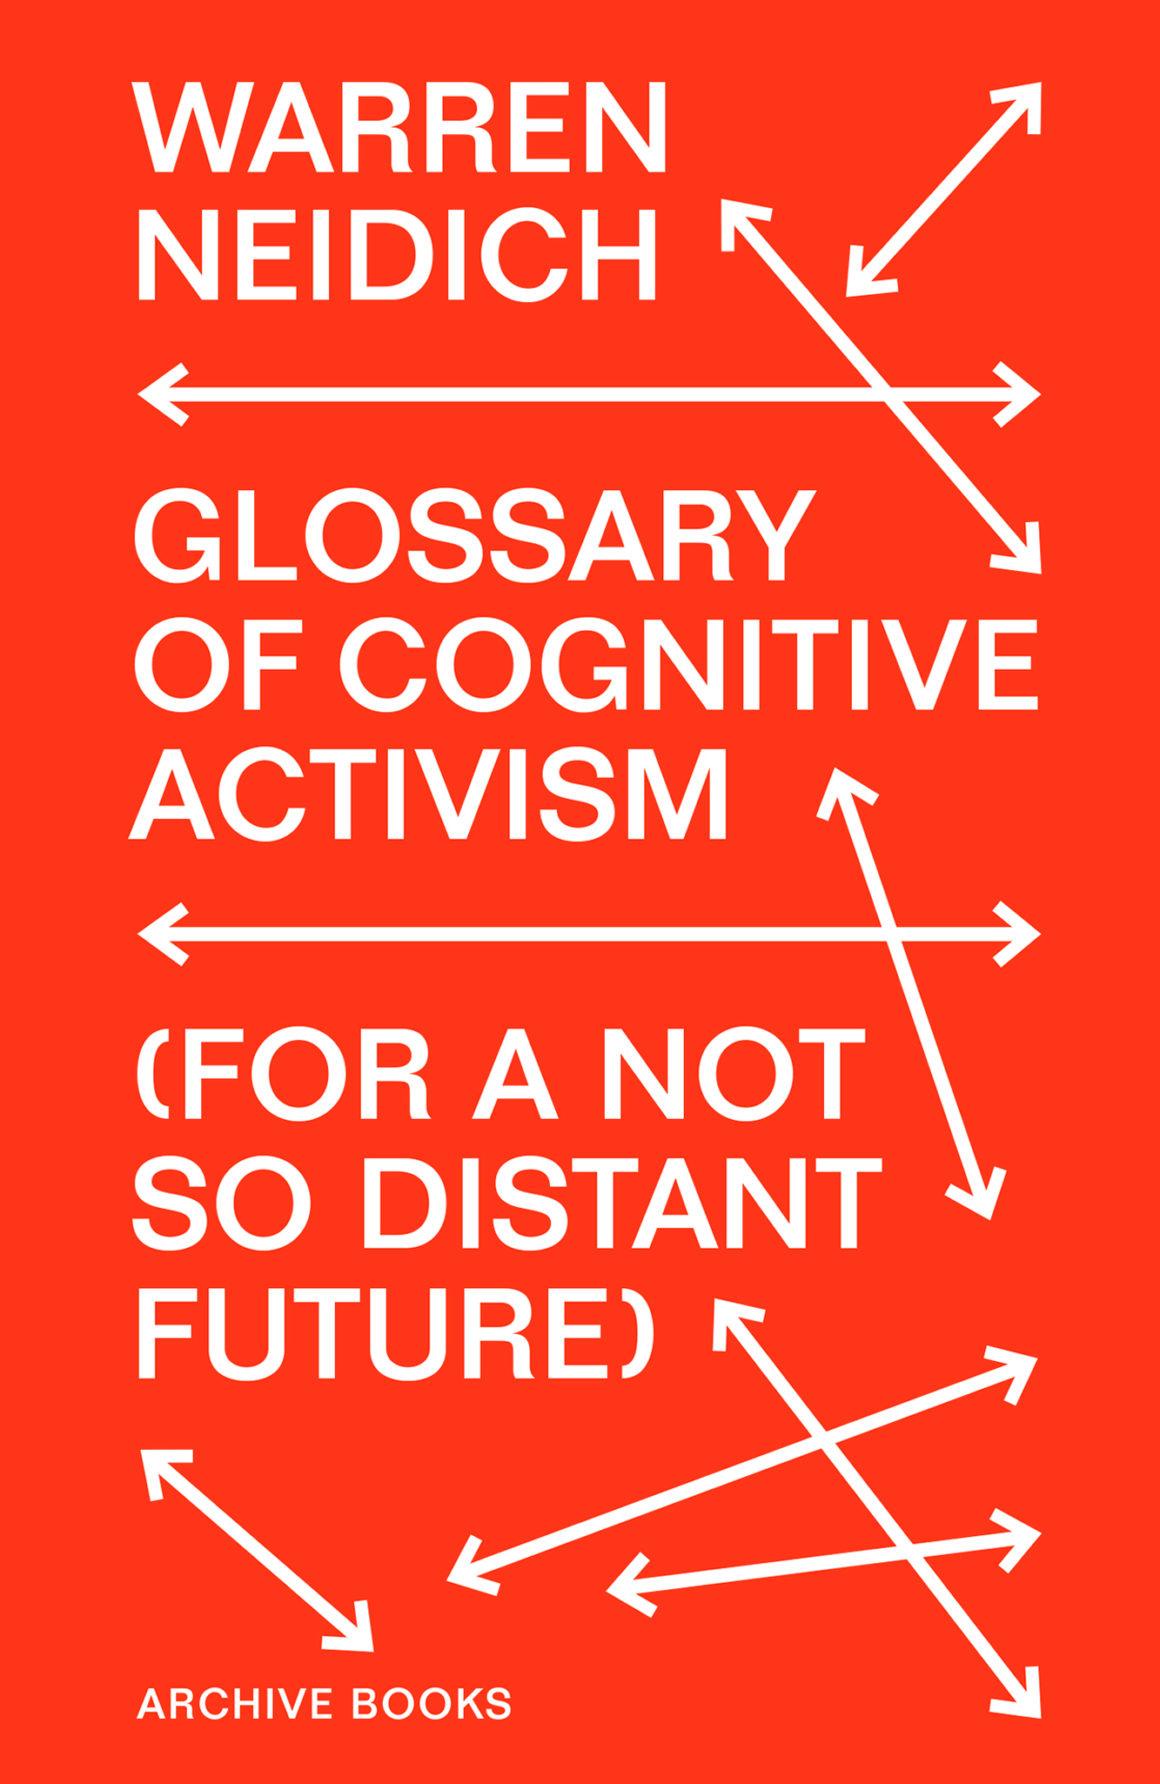 The Glossary of Cognitive Activism